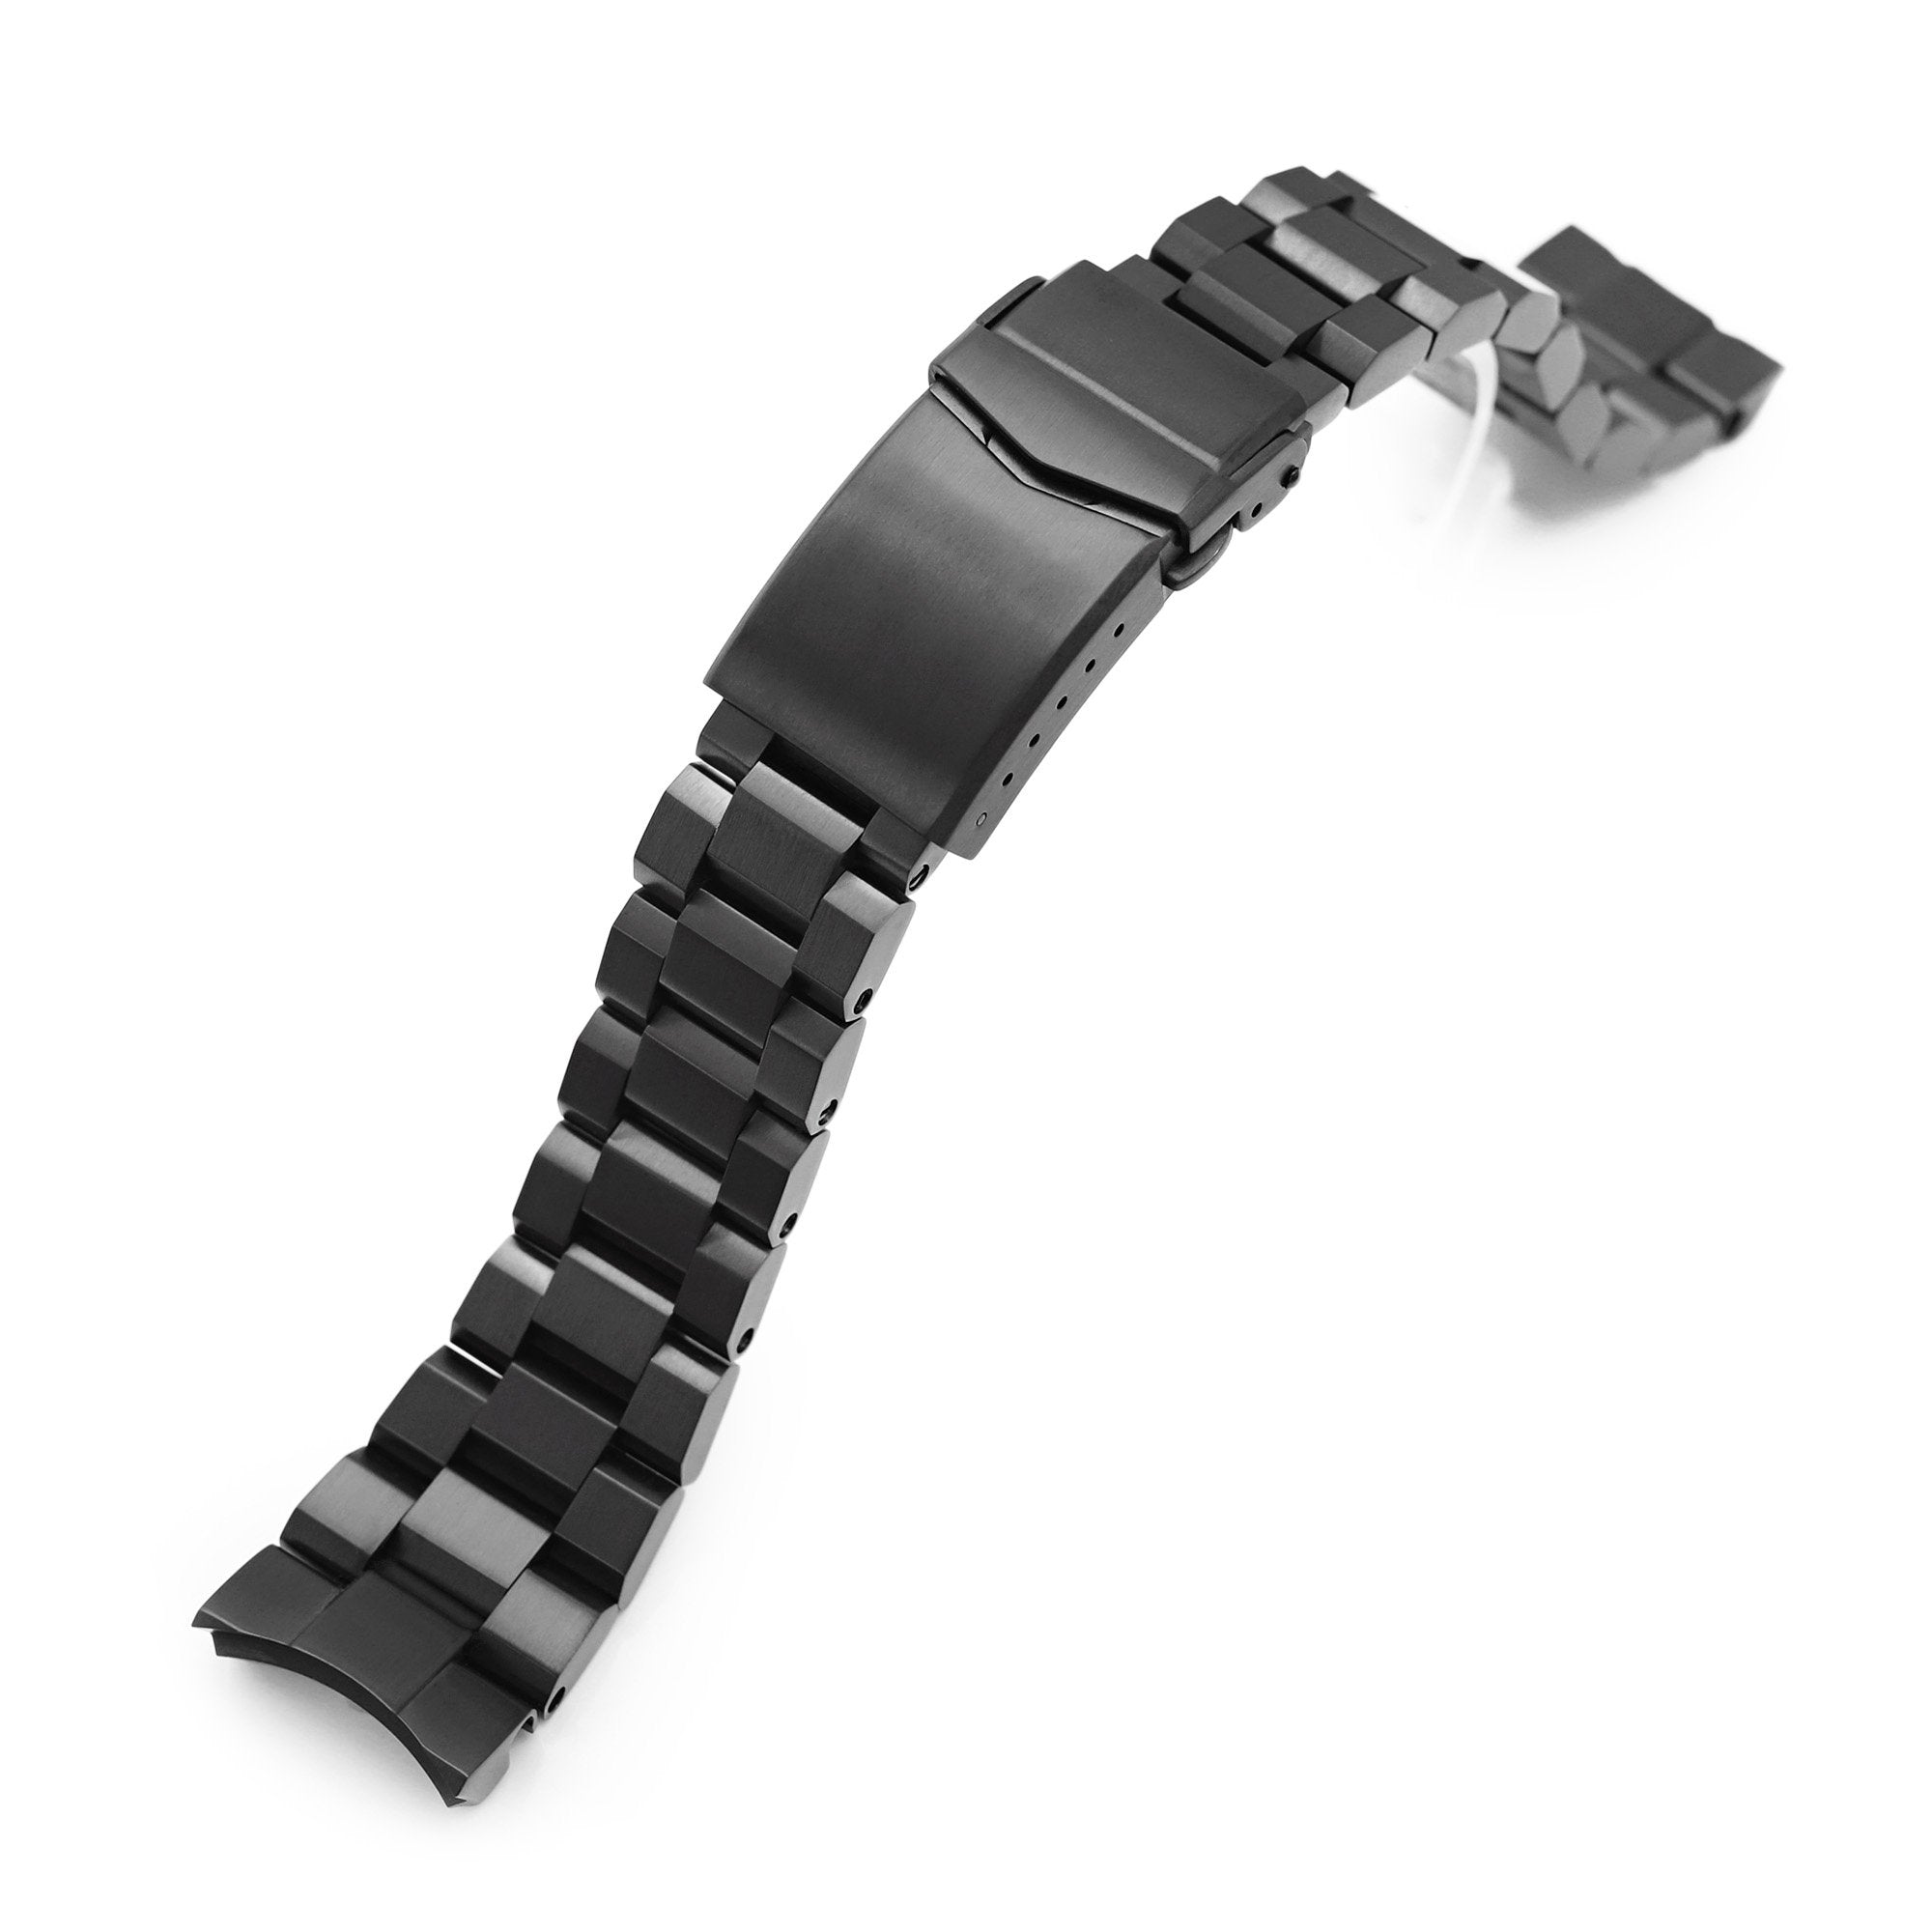 22mm Hexad 316L Stainless Steel Watch Band for Seiko Samurai SRPB51, Diamond-like Carbon (DLC coating) V-Clasp Strapcode Watch Bands